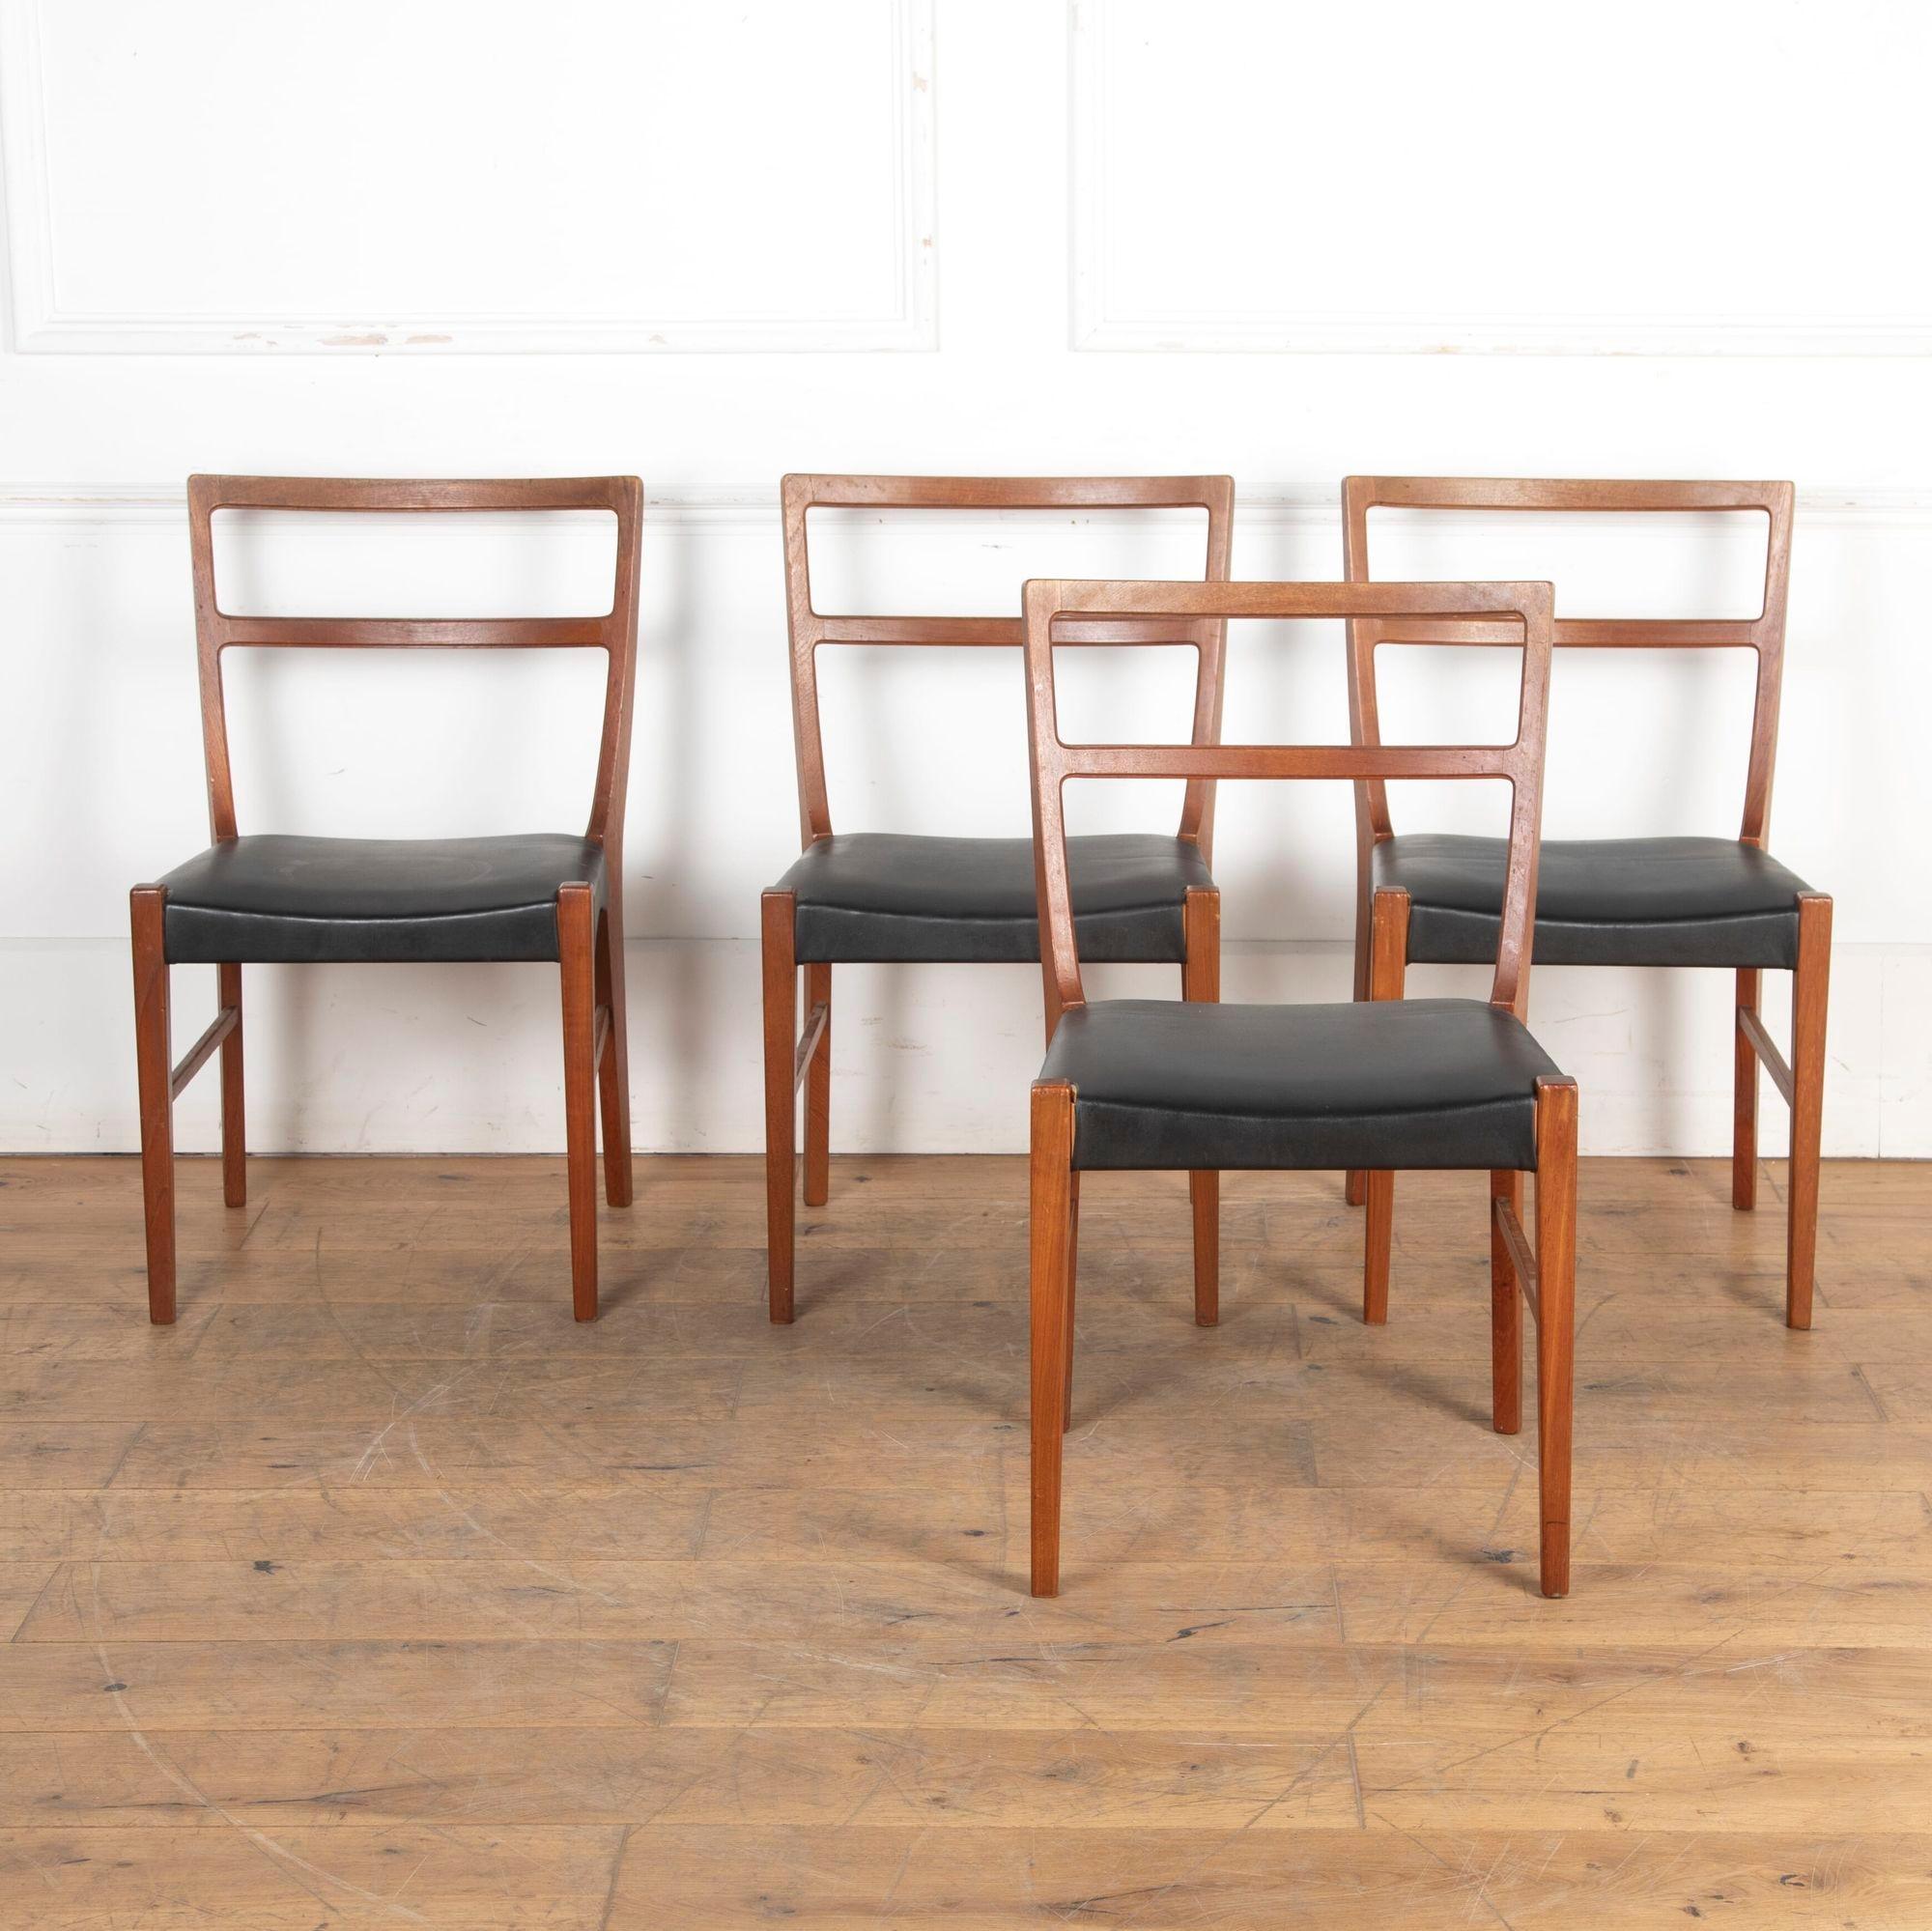 Mid-Century Modern Set of Four Teak Dining Chairs by Johannes Andersen